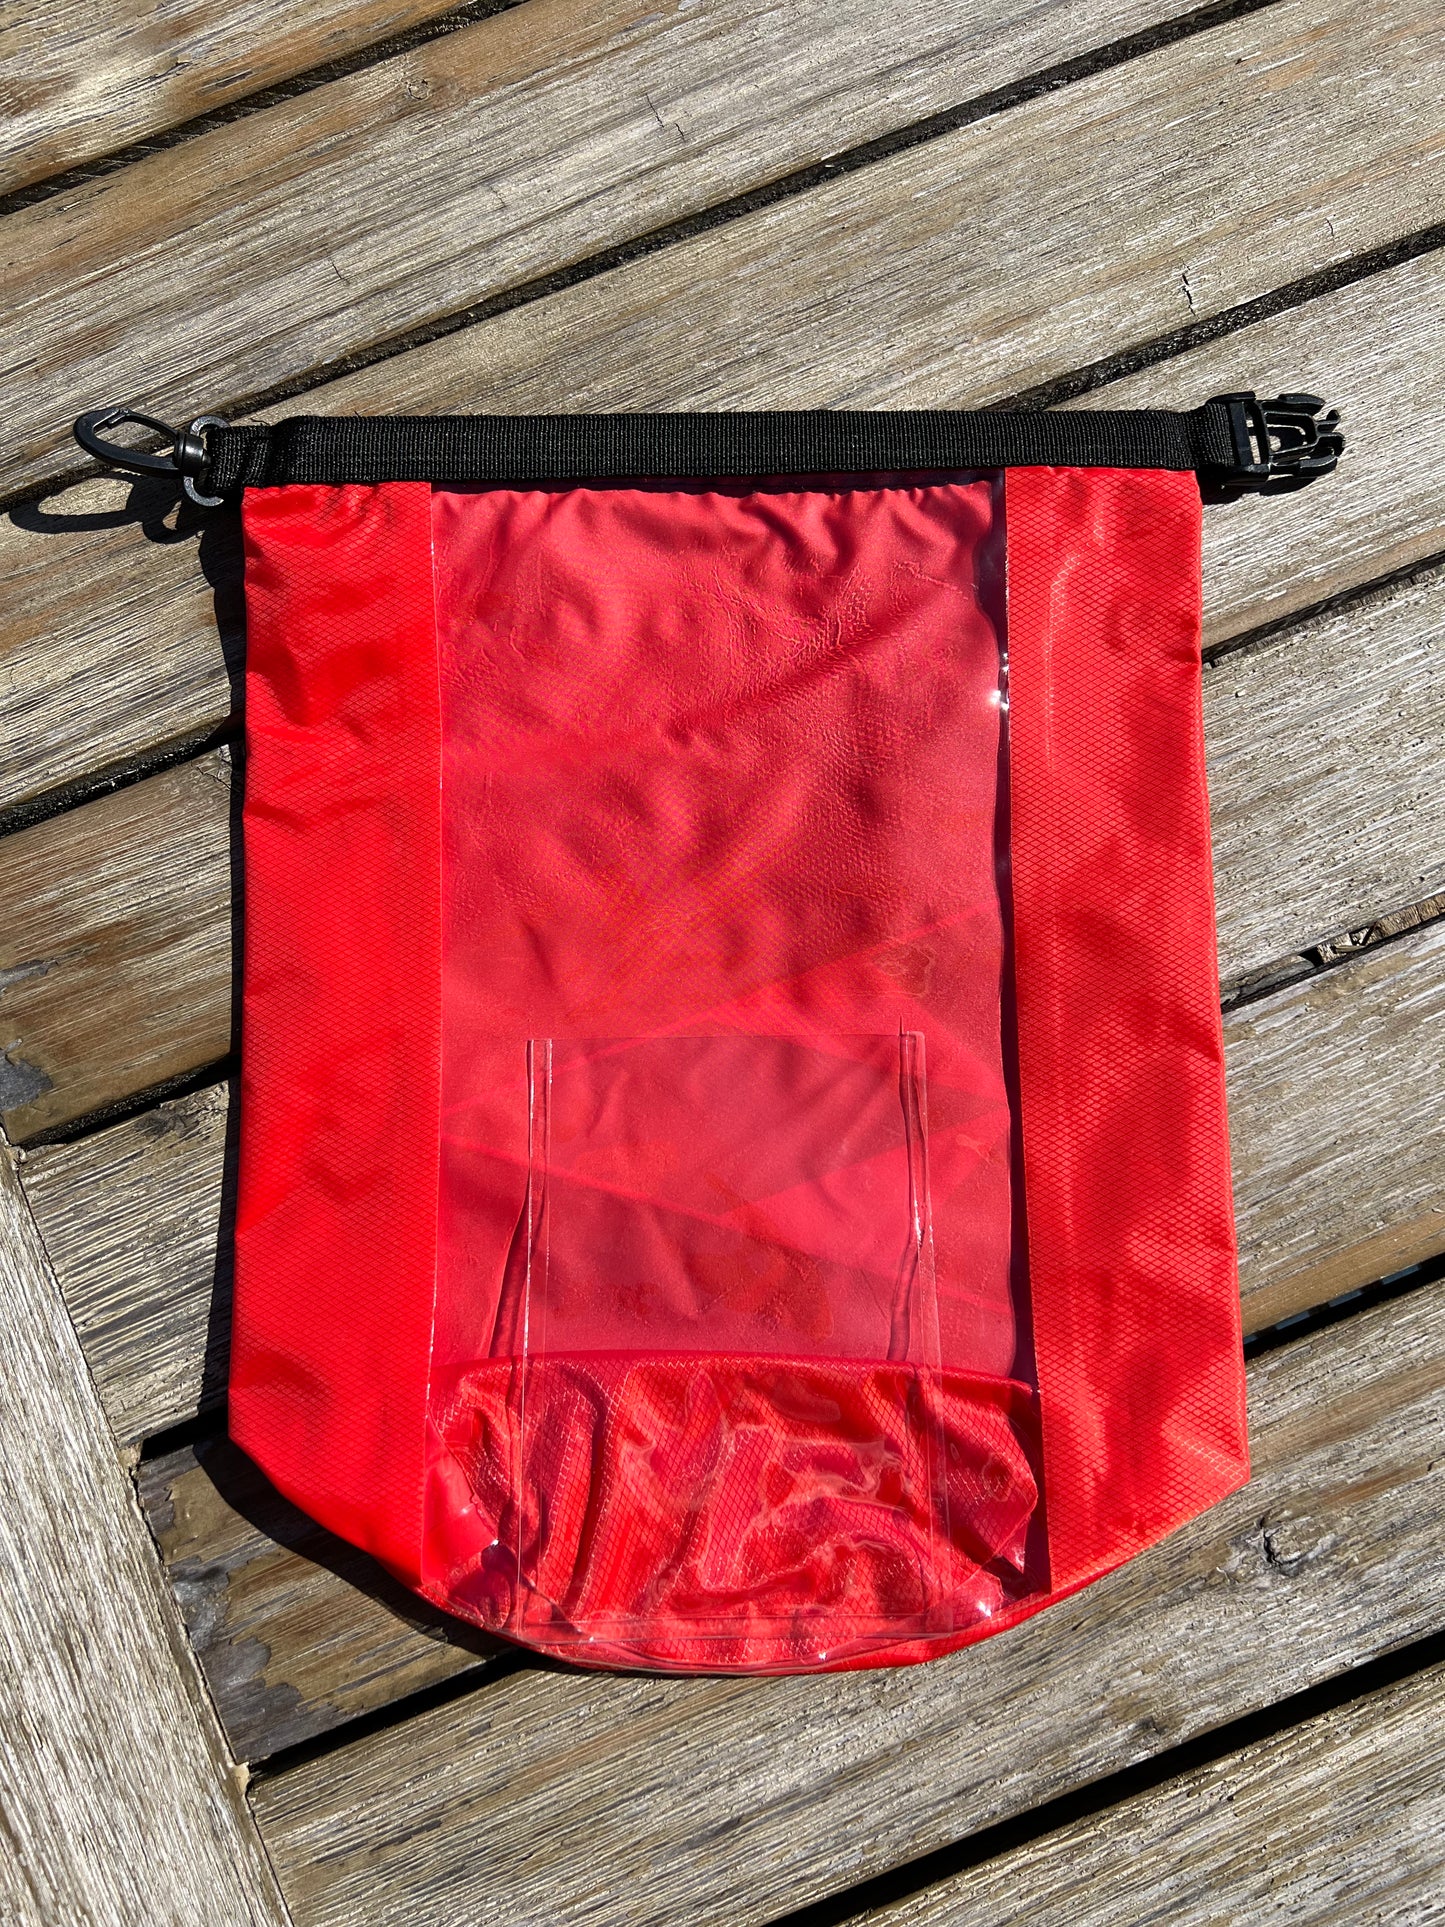 5.0 Liter Water Resistant Dry Bag With Clear Pocket Window